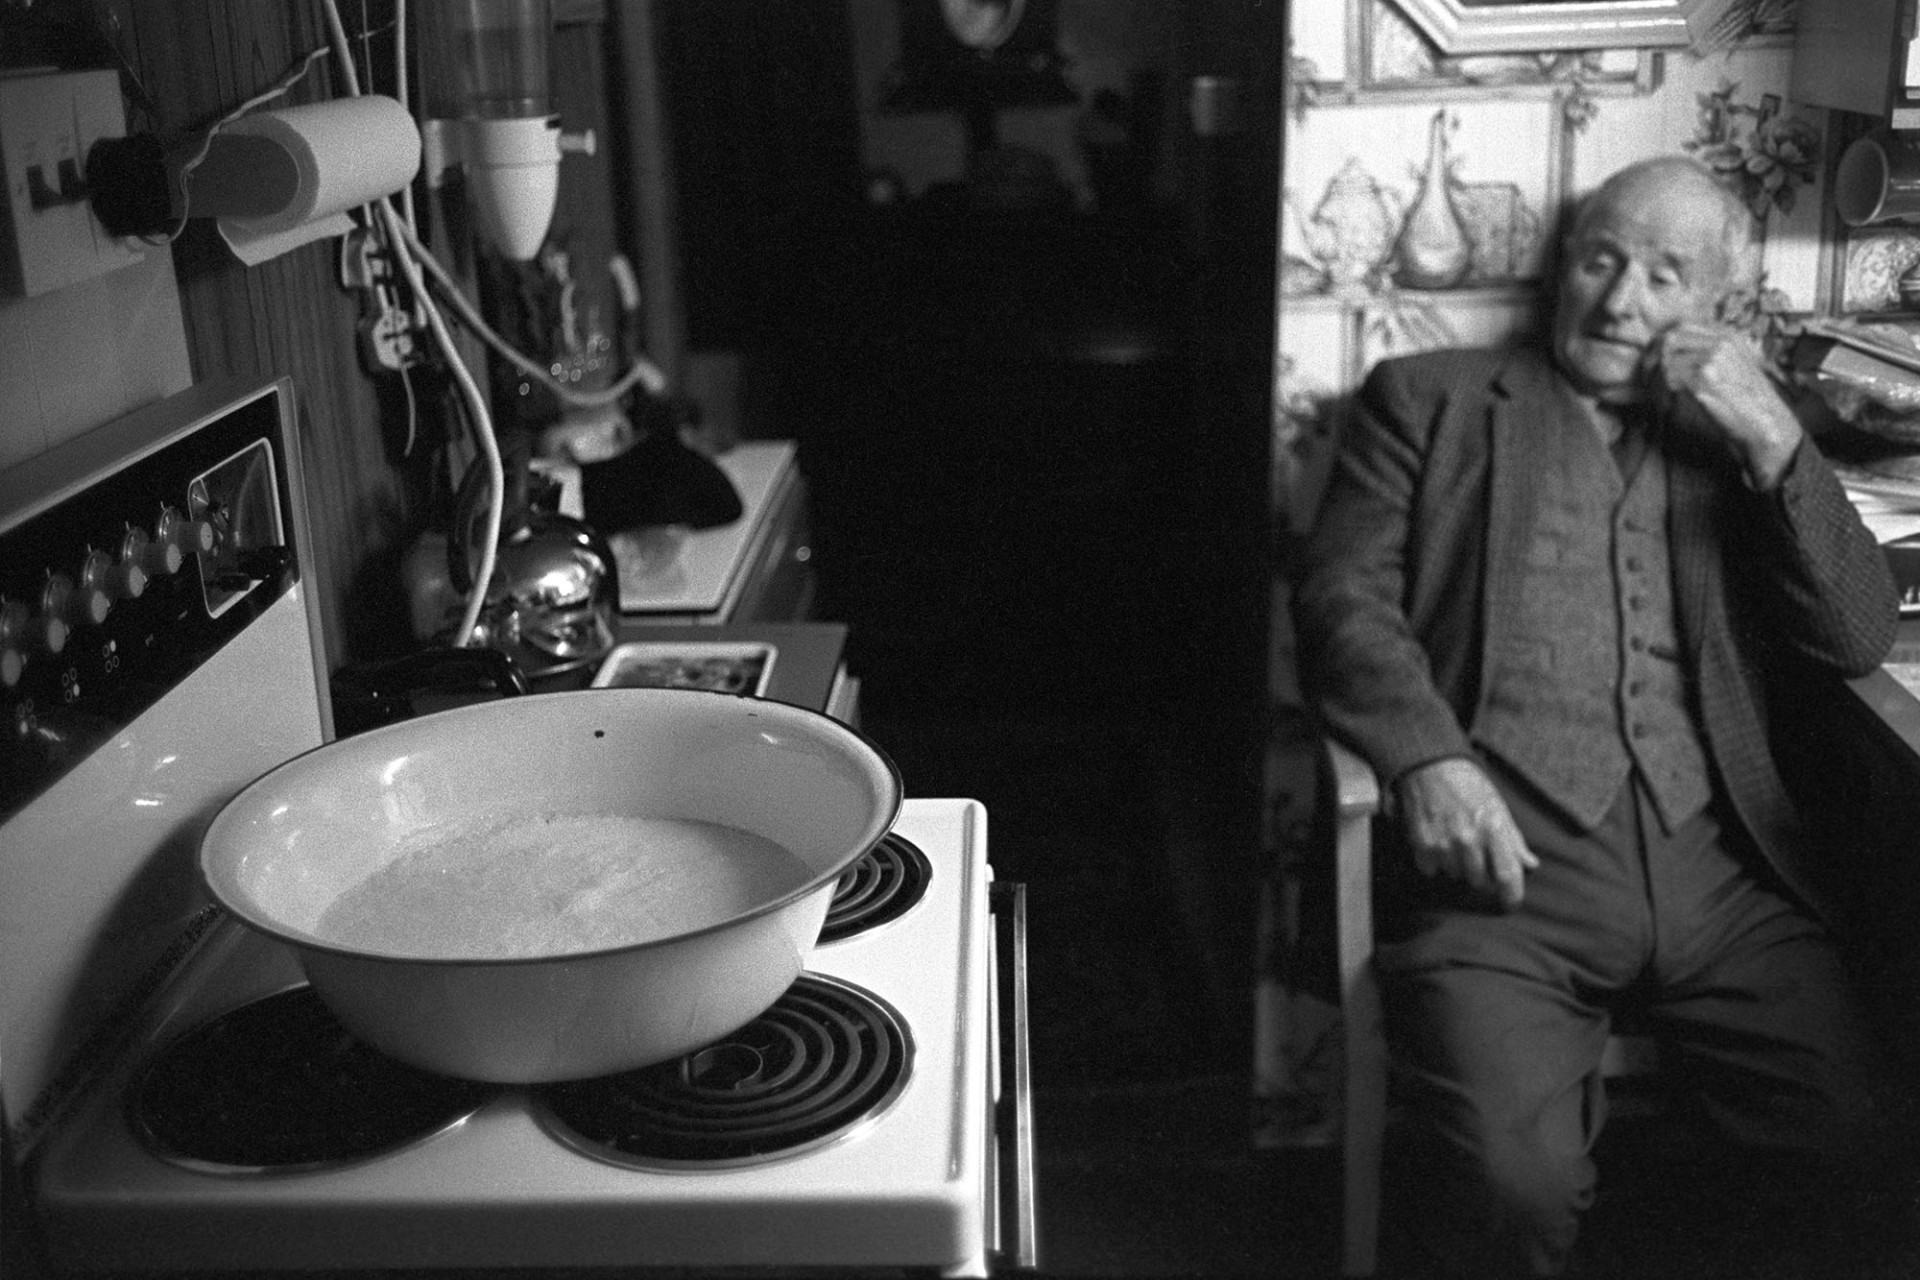 Clotted cream on stove, old man in background.
[George Voysey sat in his kitchen looking at a bowl of clotted cream on the cooker, at Cawseys, Roborough.]